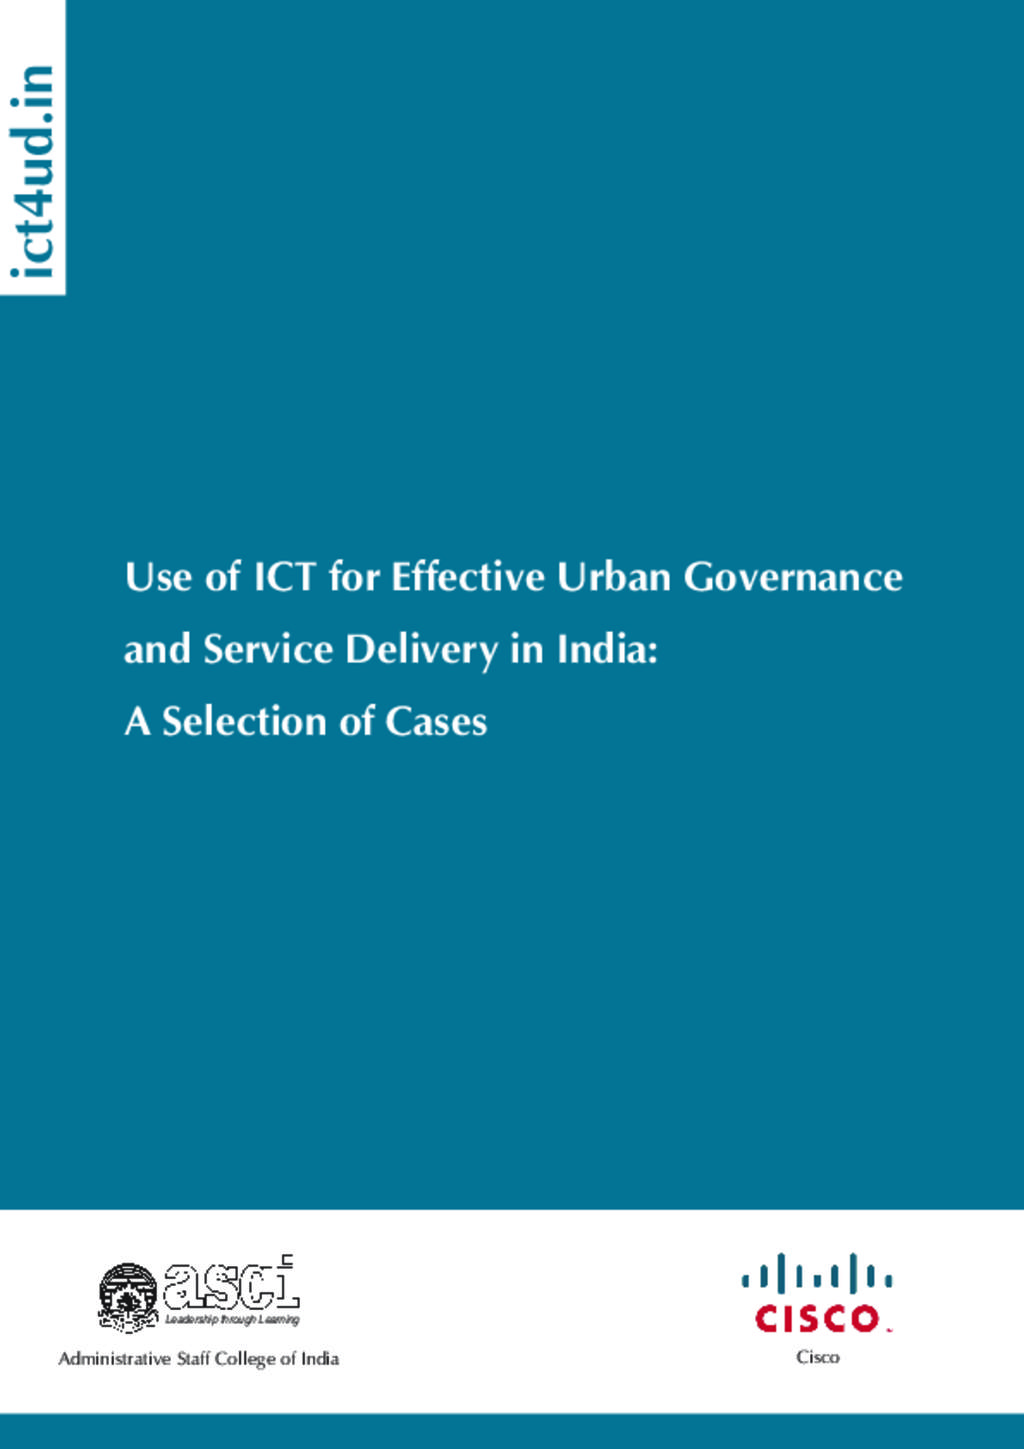 Use of ICT for Effective Urban Governance and Service Delivery in India